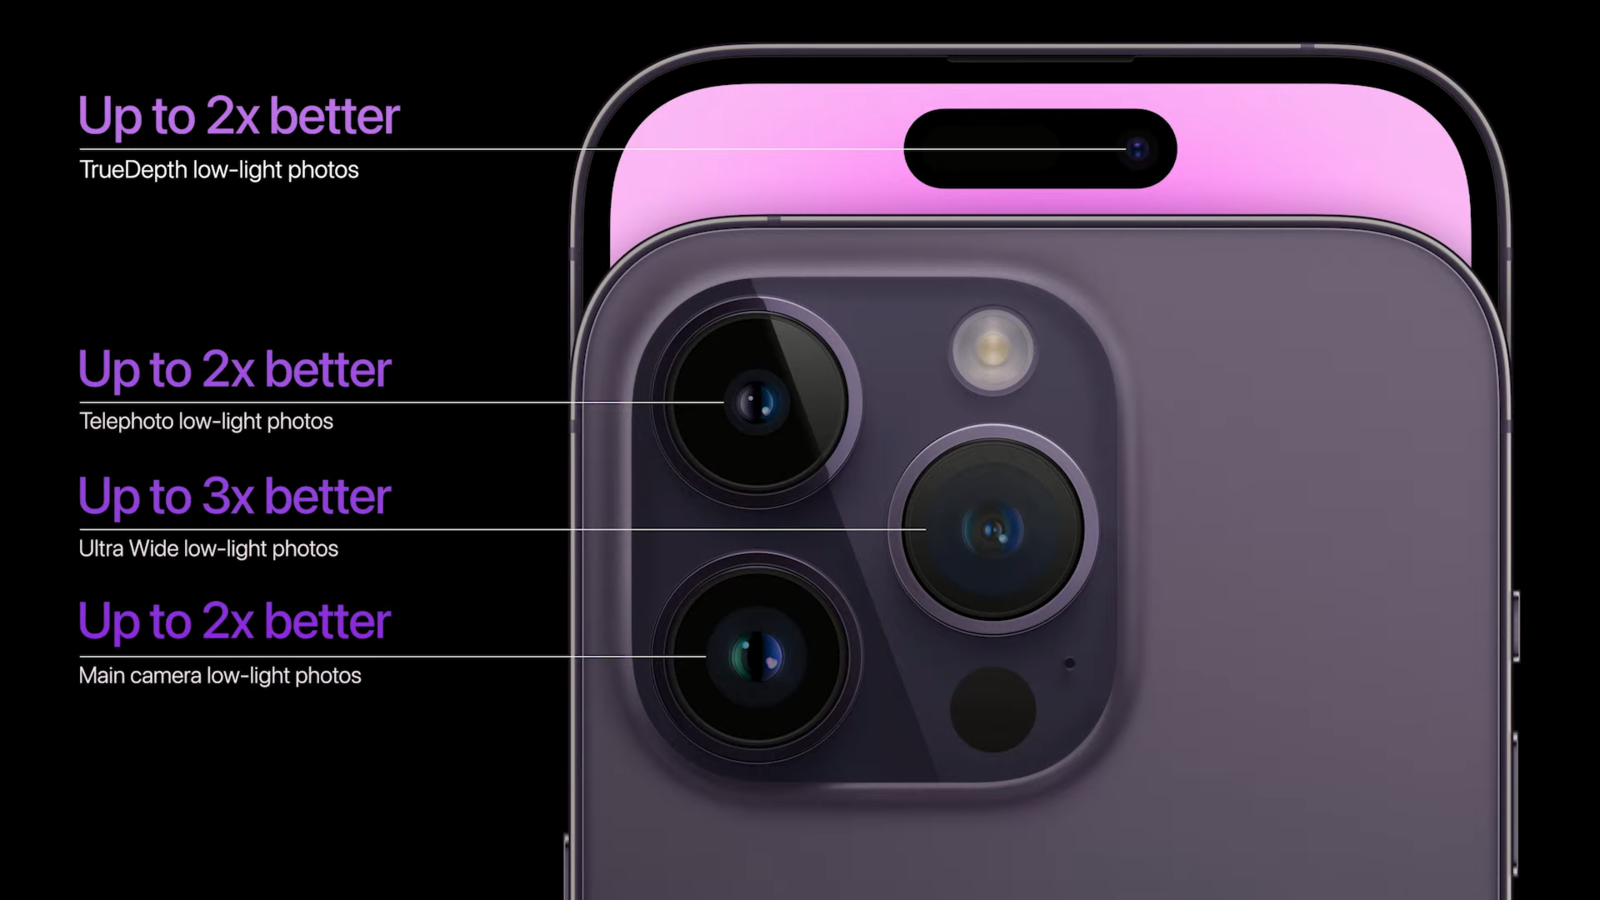 Apple is sending the camera fix to all iPhone 14 Pro and 14 Pro Max users